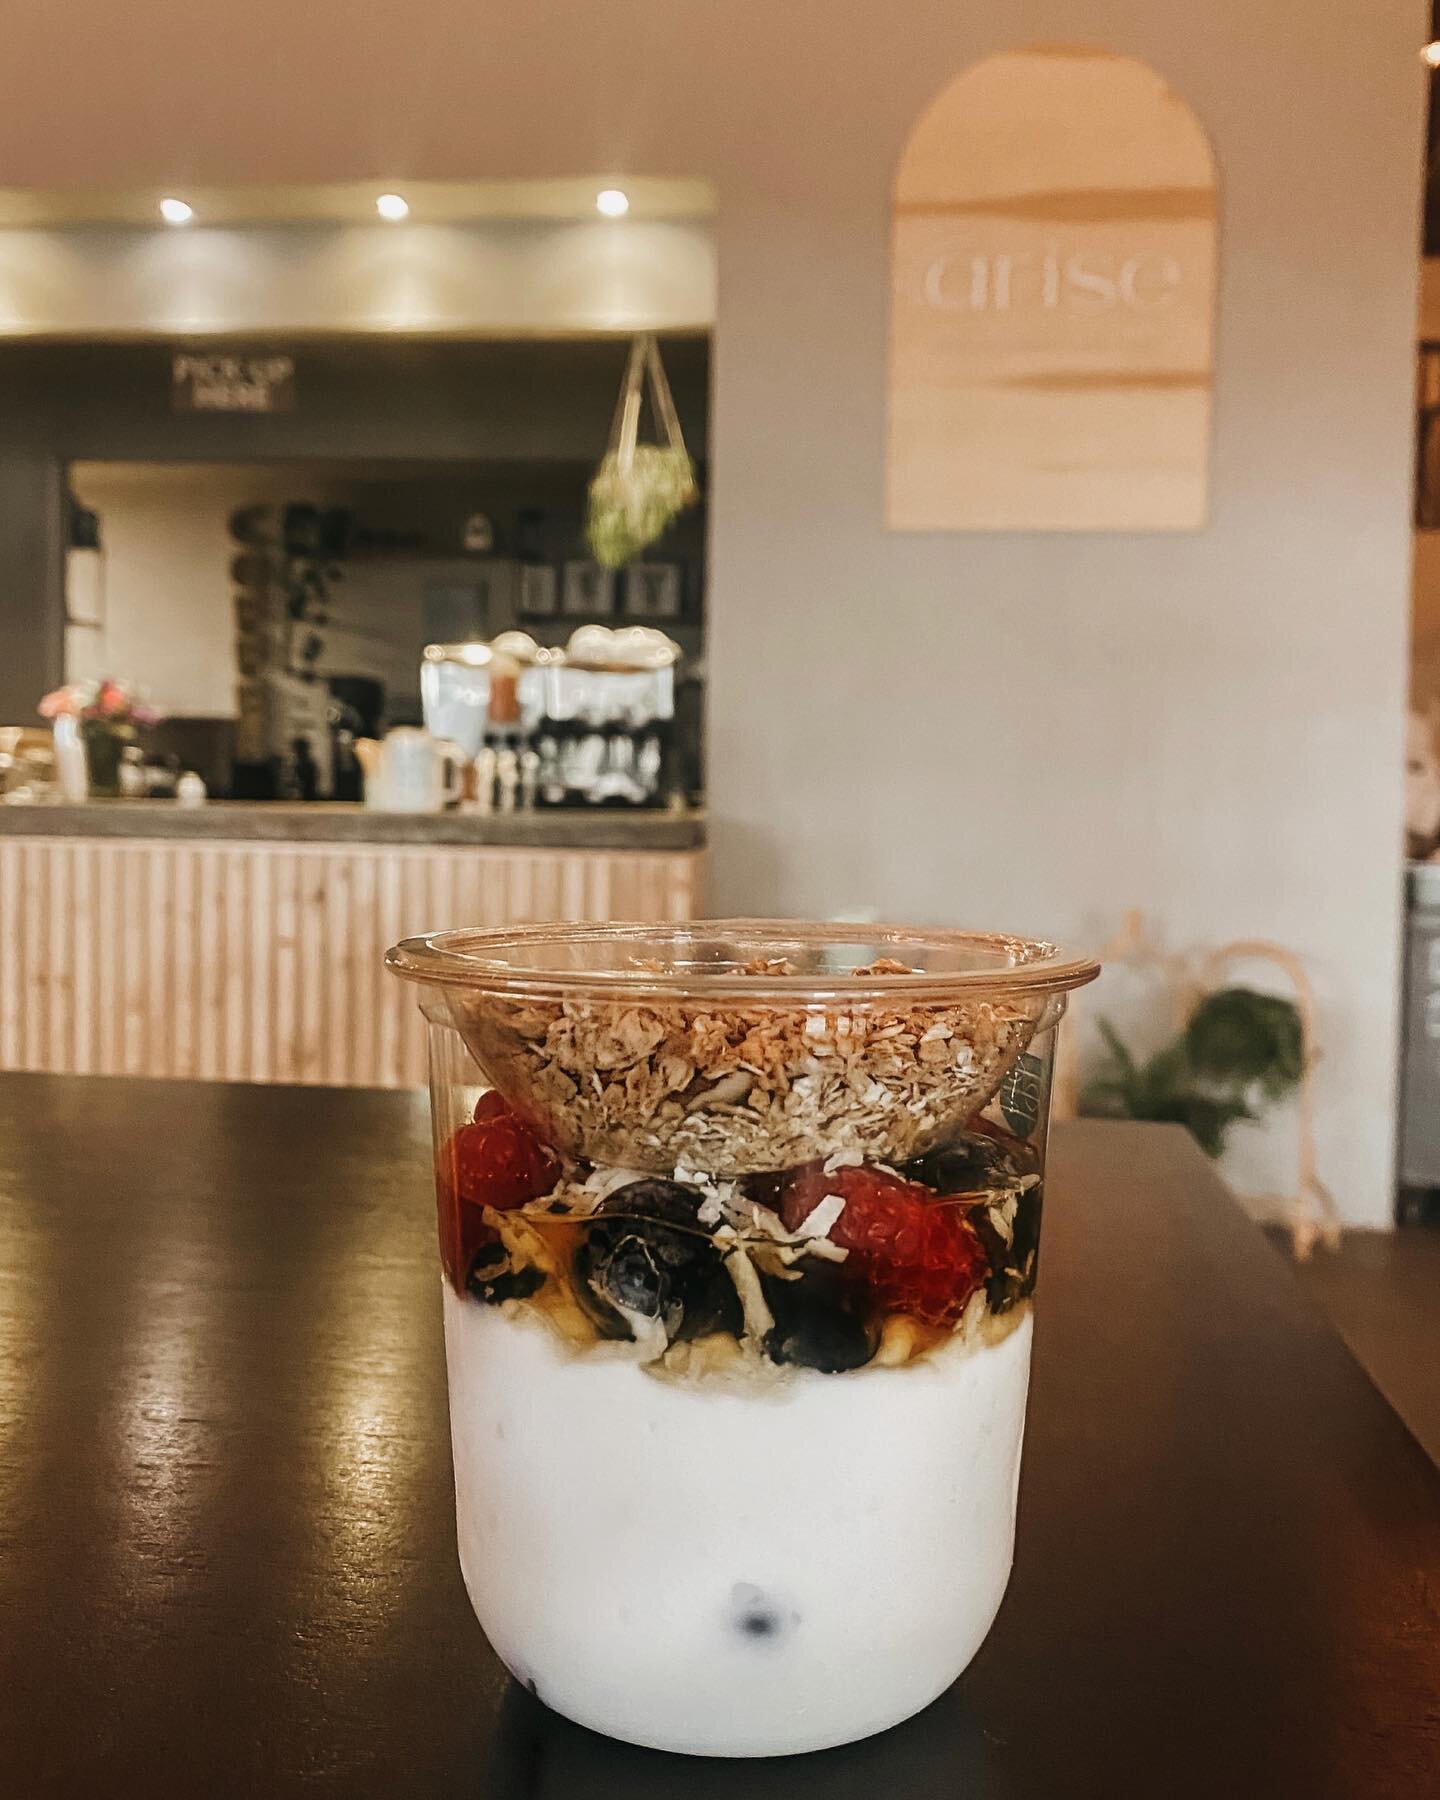 Look what we will have in our display case tomorrow 🤗 HEALTHY!!! Greek yogurt with berries, honey, coconut and granola.